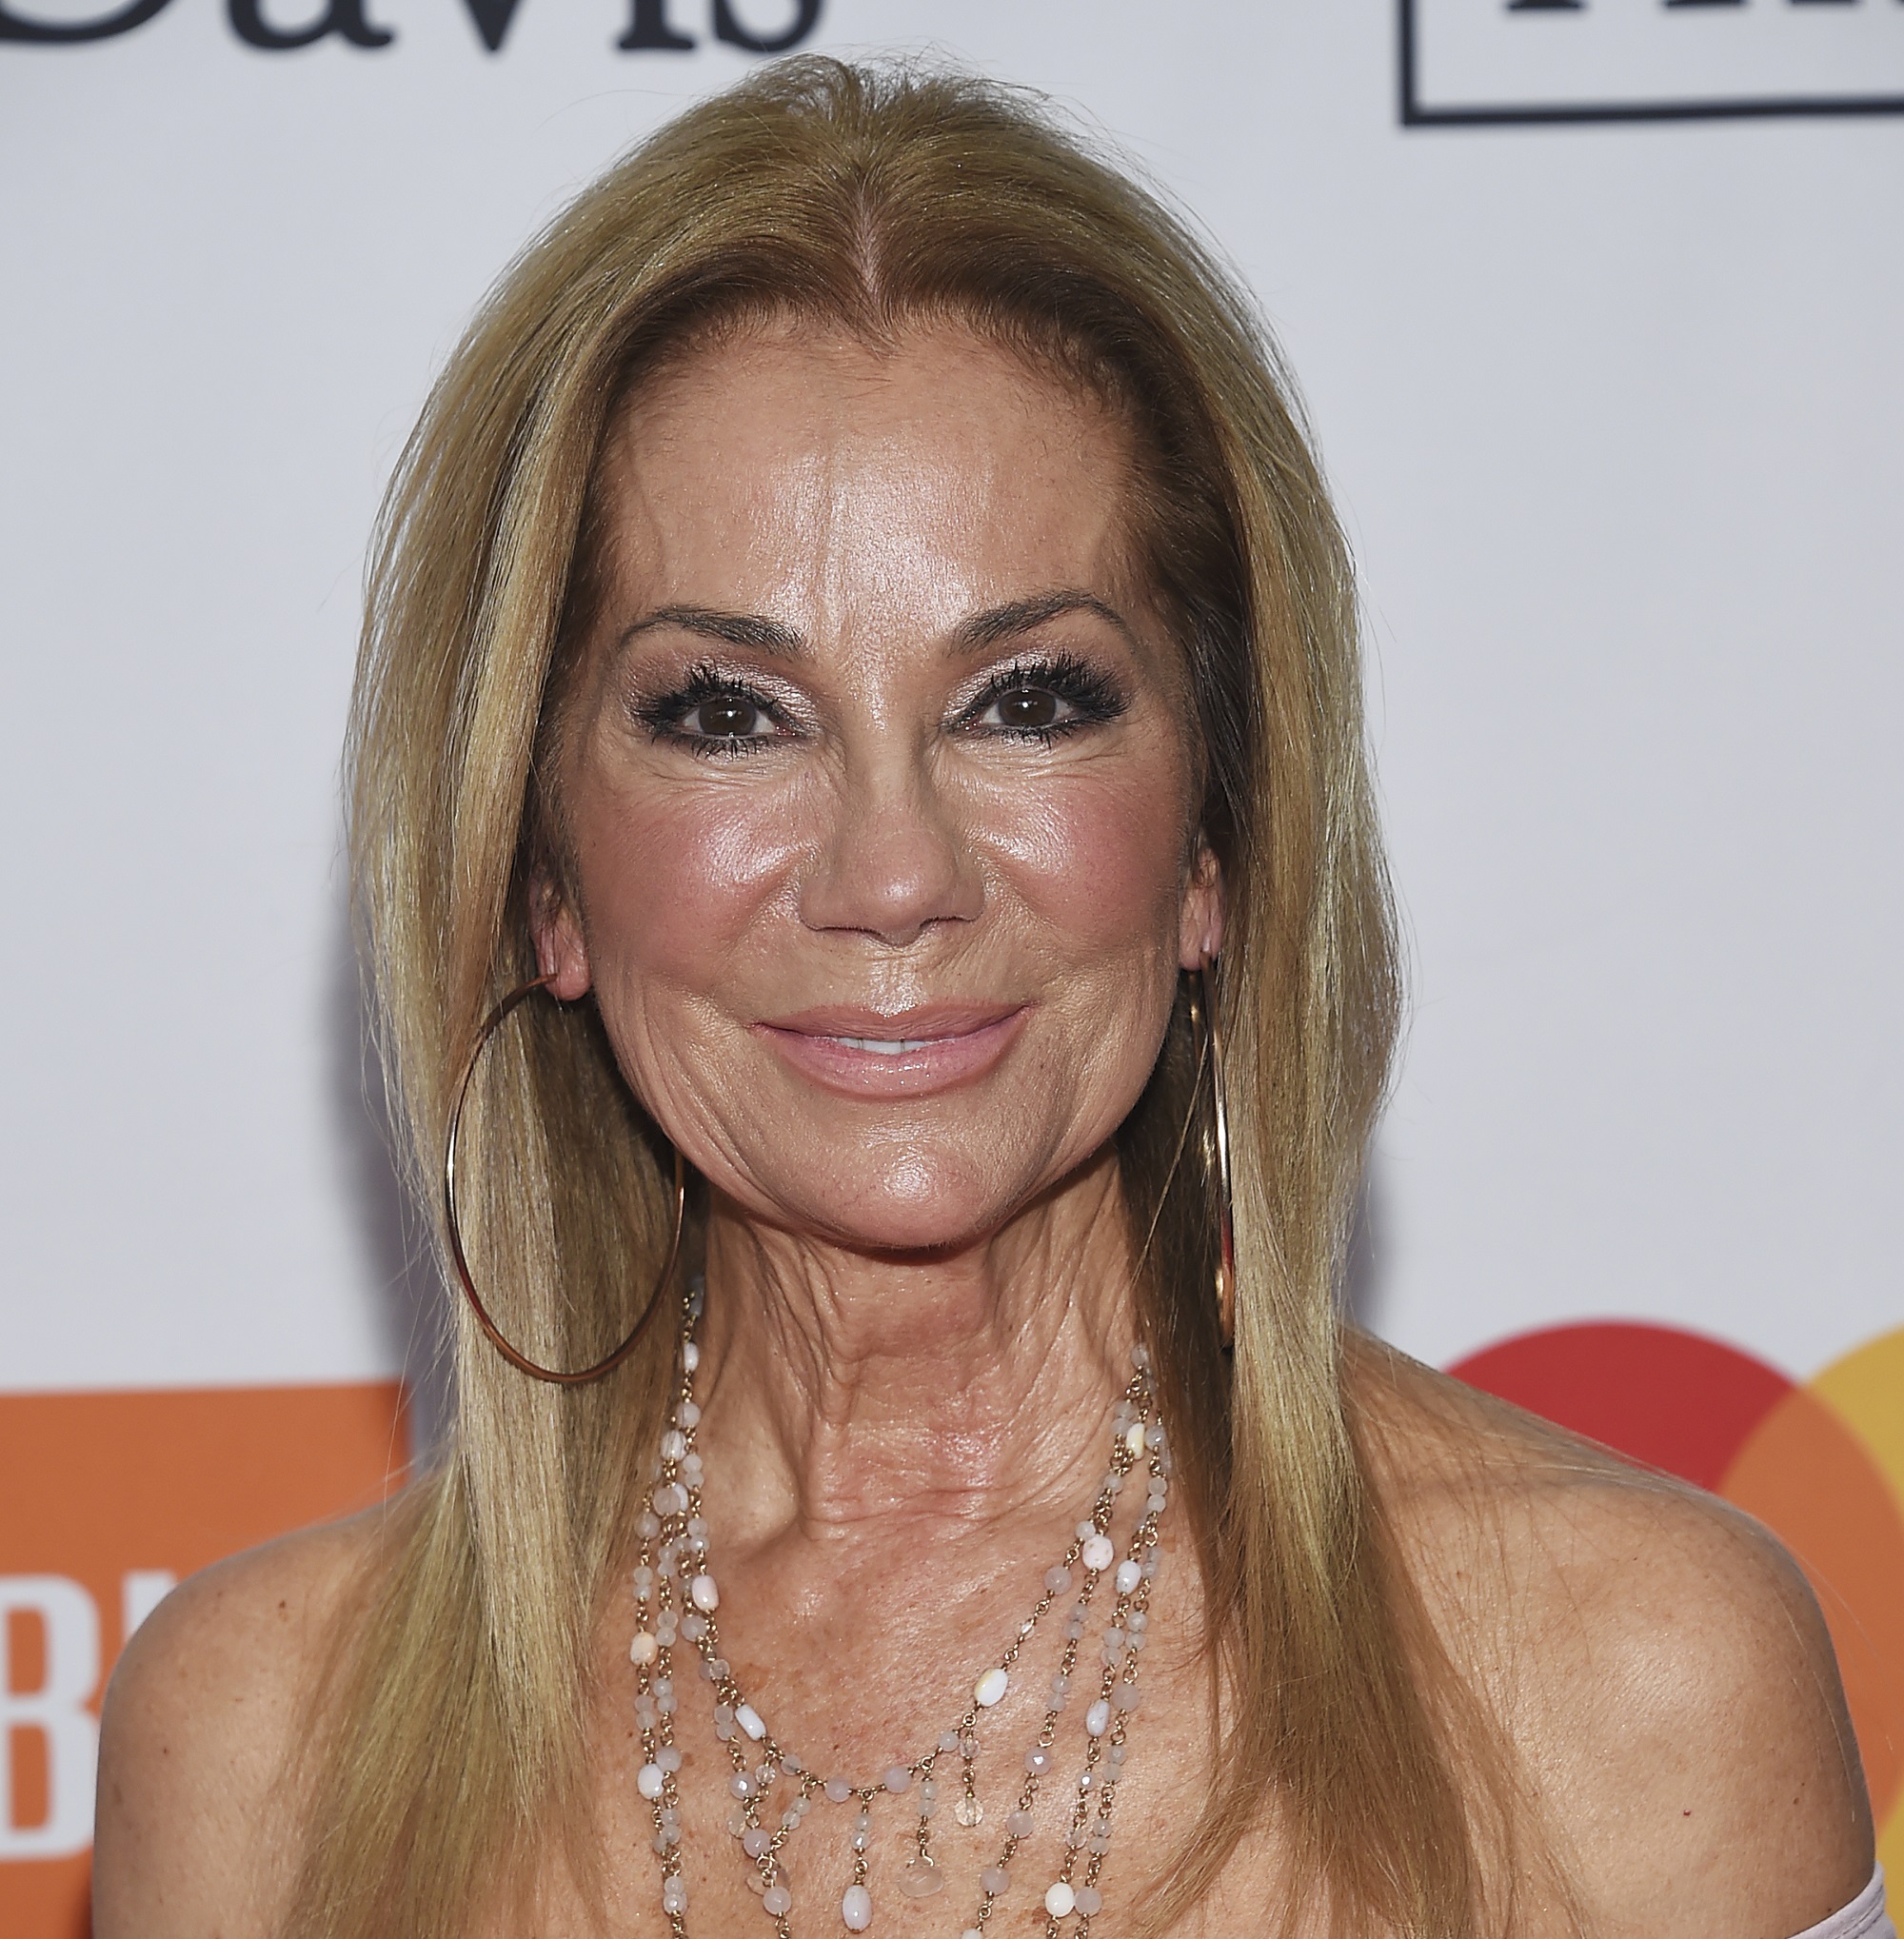 Kathie Lee Gifford Without Makeup - 5000 Looks.